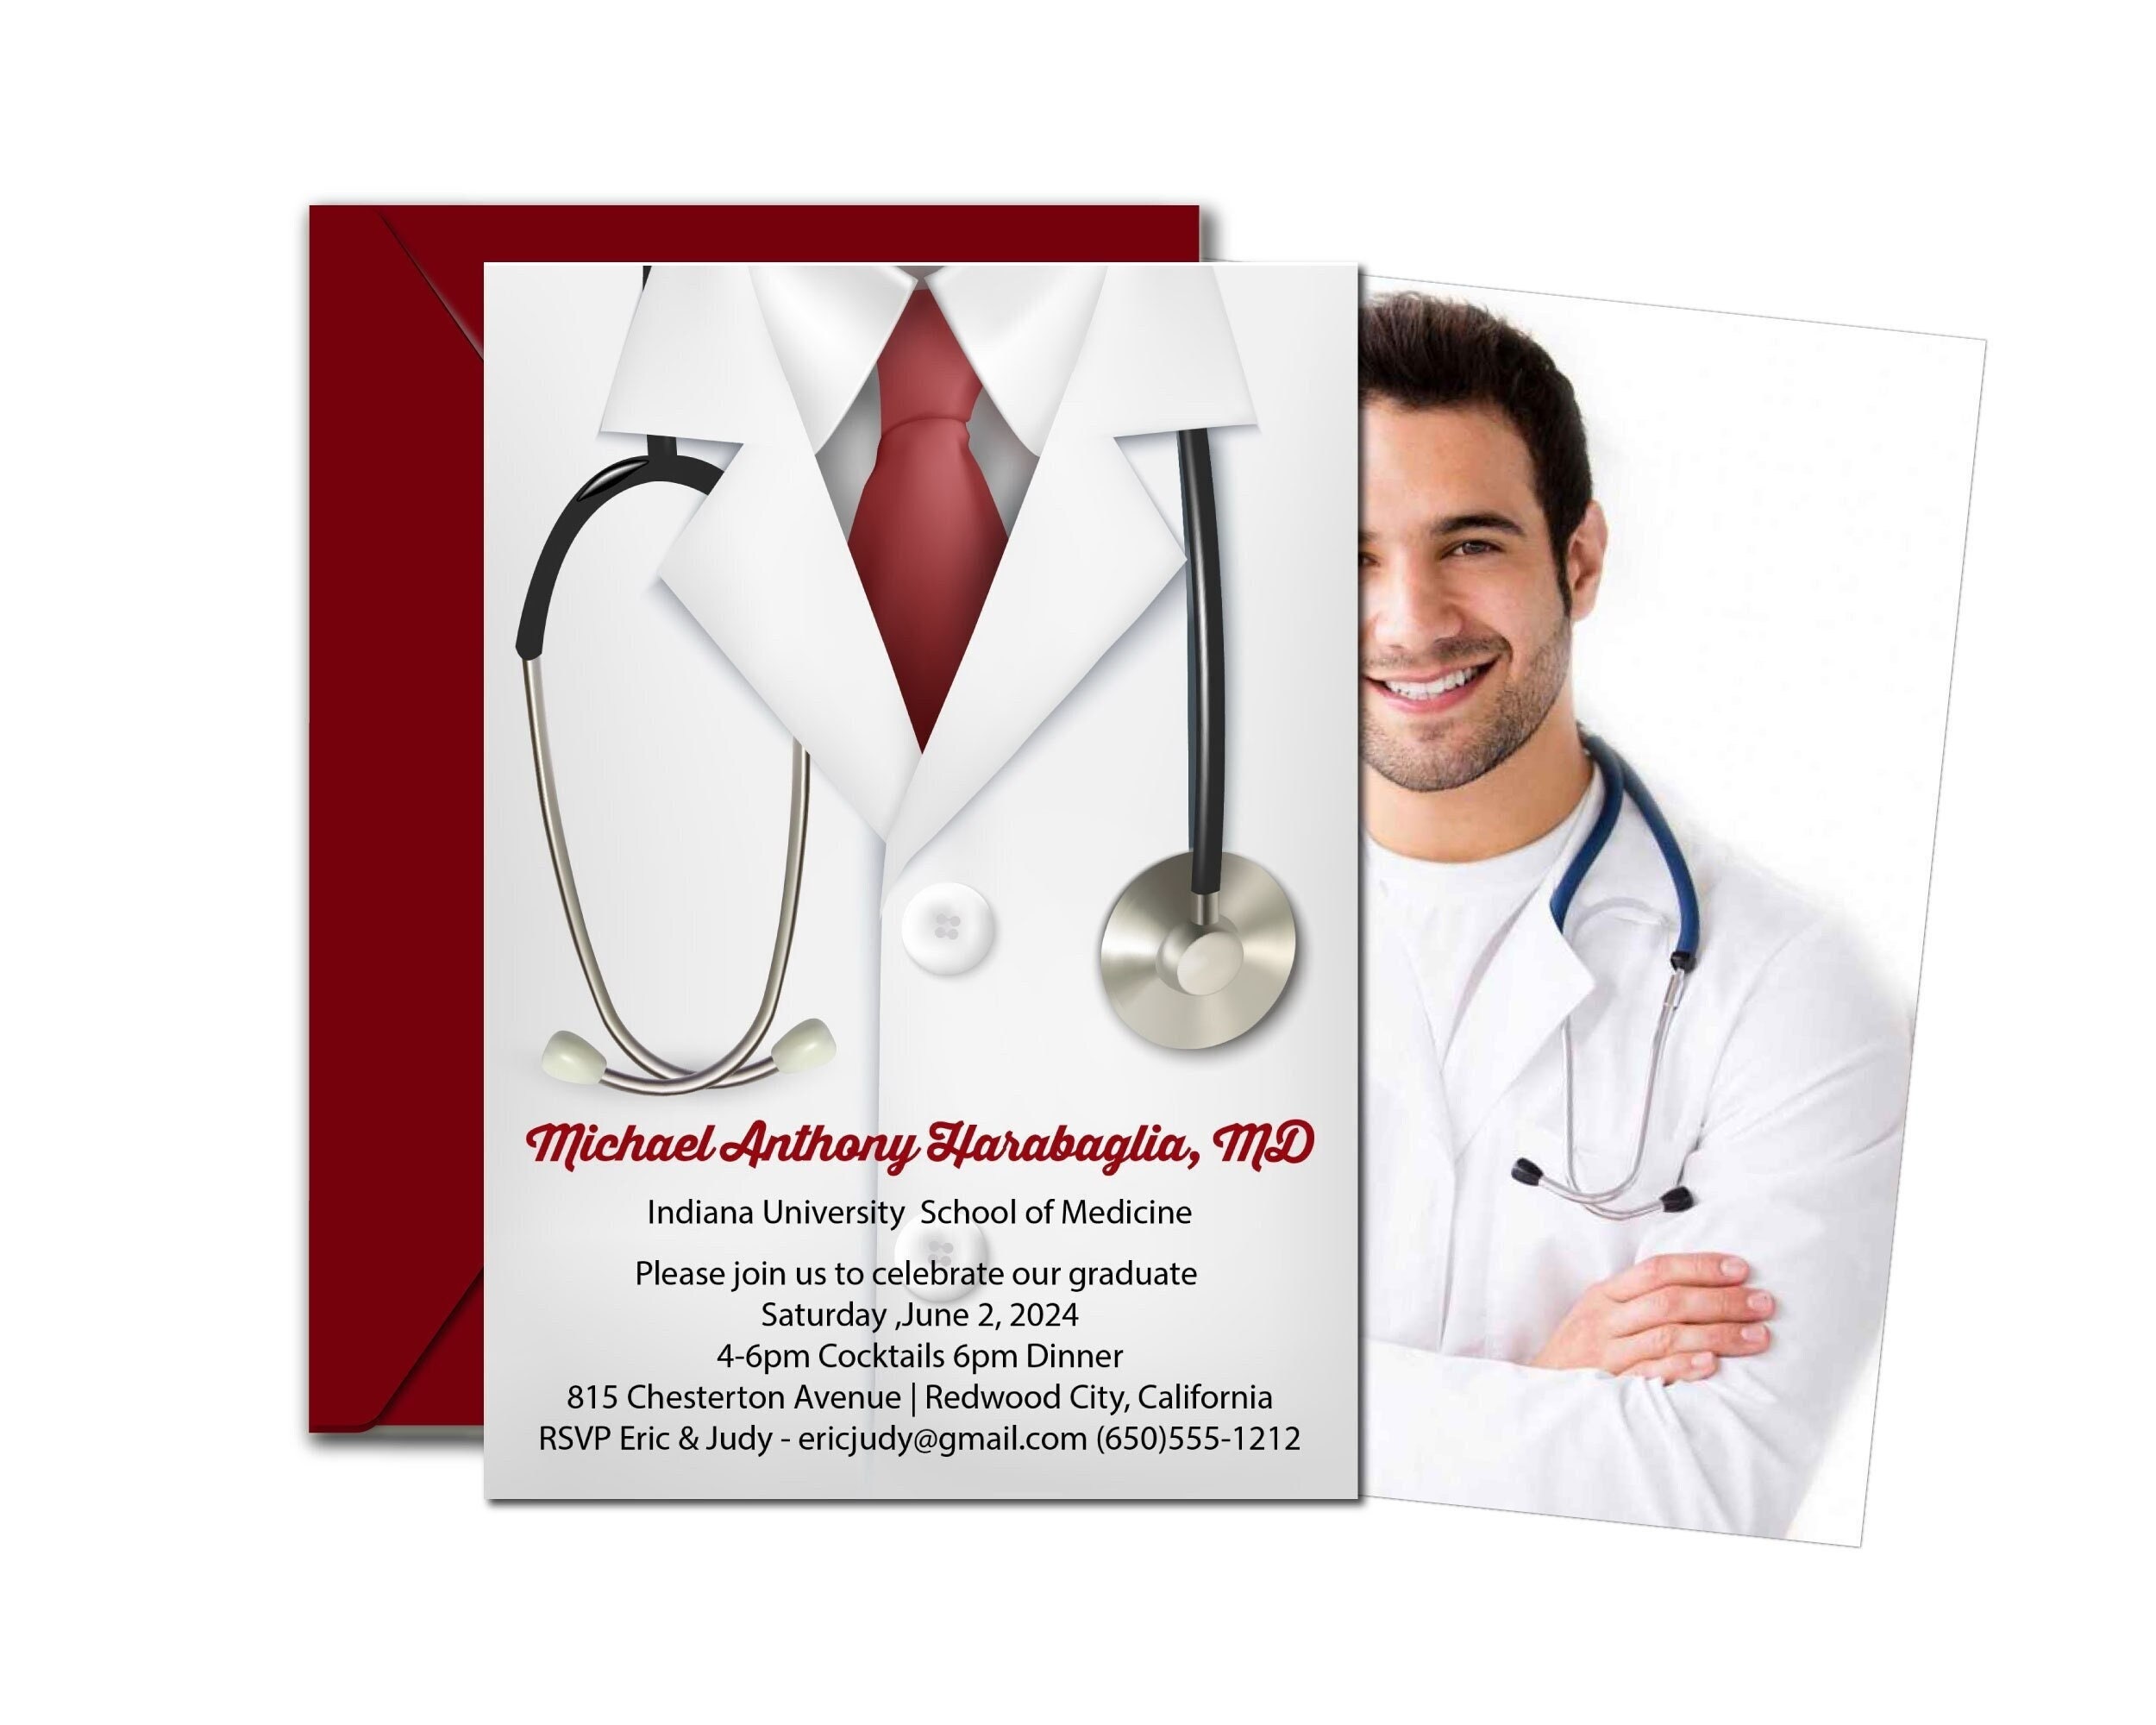 Doctor Hanger - Medical School Graduation Gift · Handcrafted Affairs ·  Online Store Powered by Storenvy